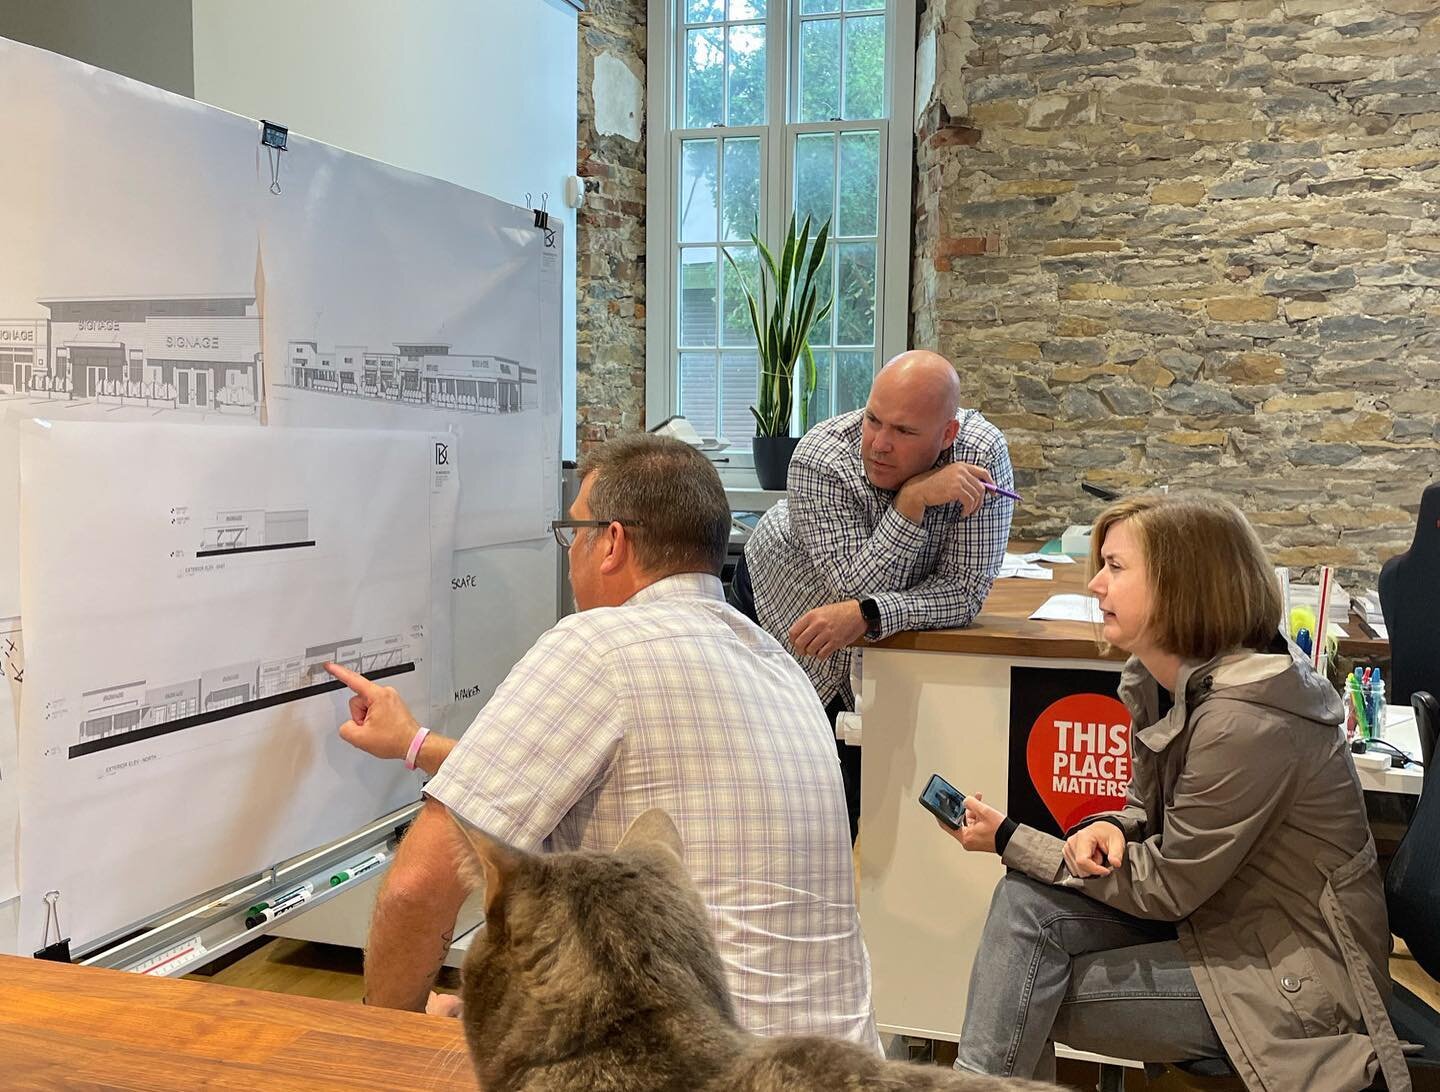 Ideas are flowing at our DK office as our team collaborates on a design for a new retail development. 

#retaildevelopment 
#architecturedesign 
#multitenat 
#teamcollaboration